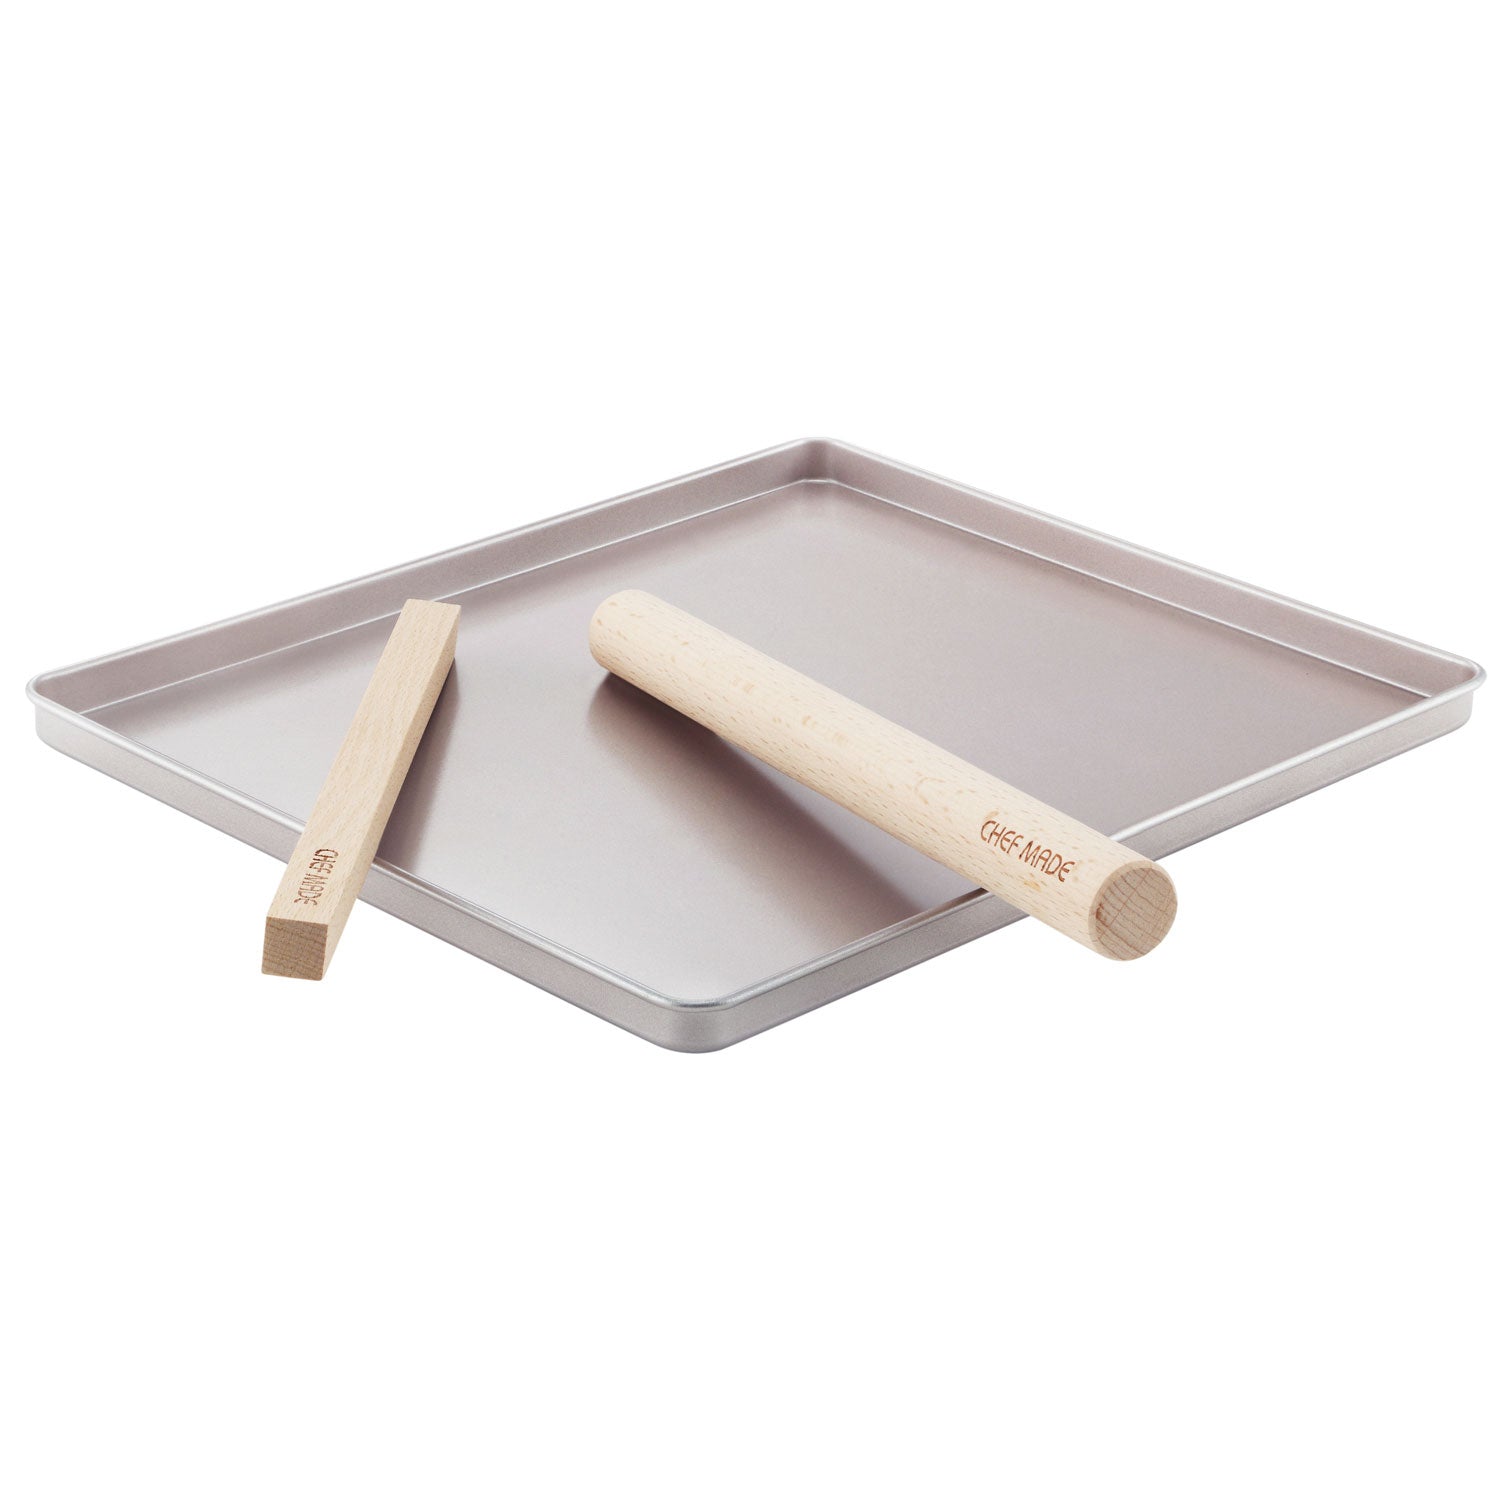 10" x 12" Jelly Roll Pan with Wooden Sticks